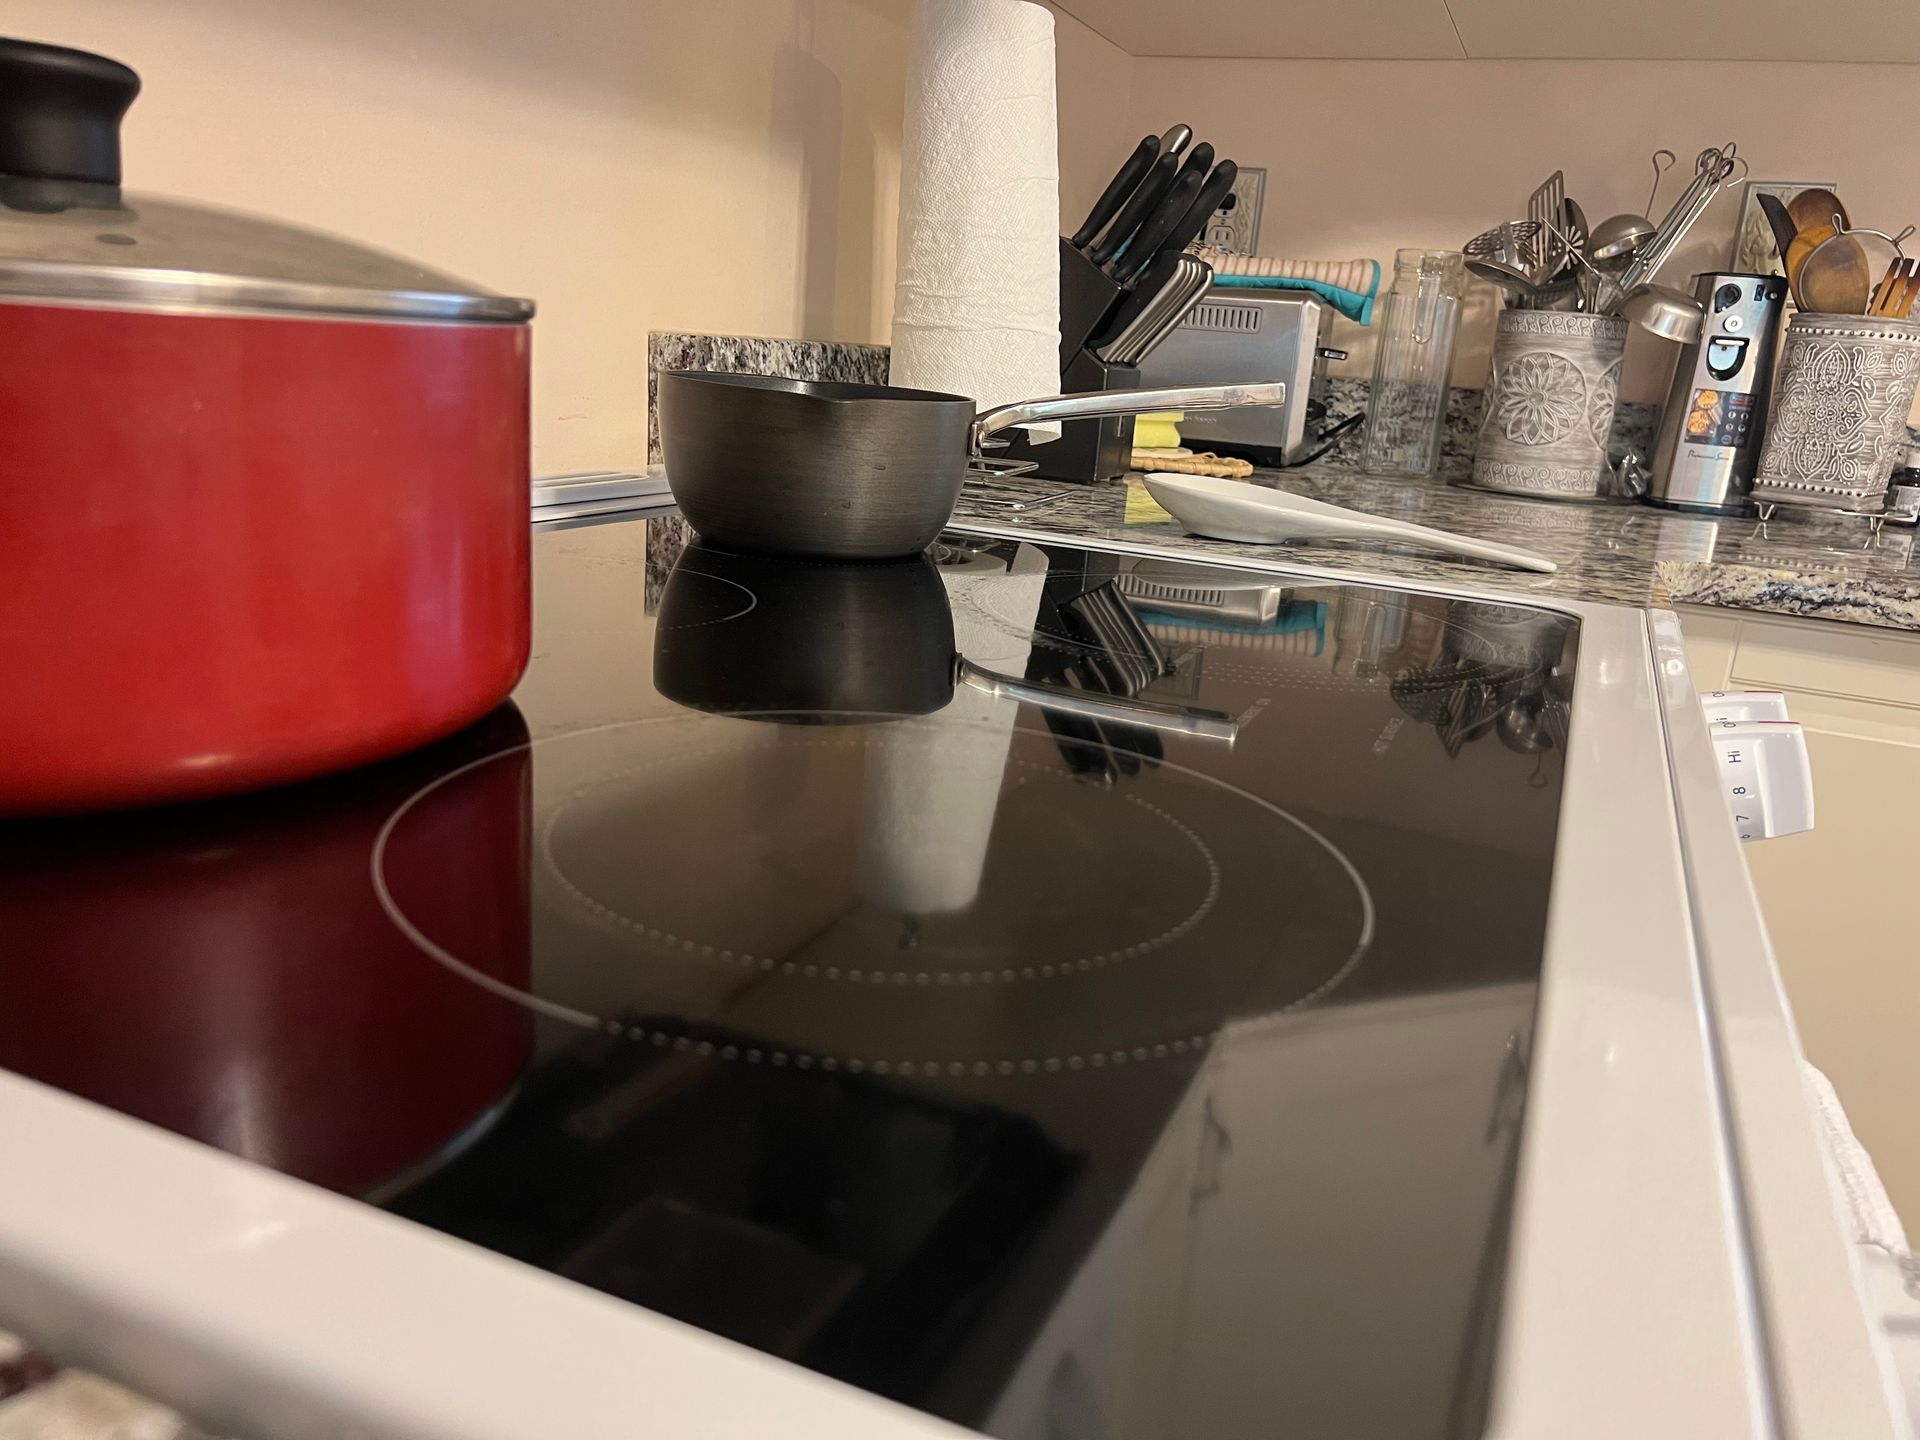 a pot is sitting on top of a stove in a kitchen